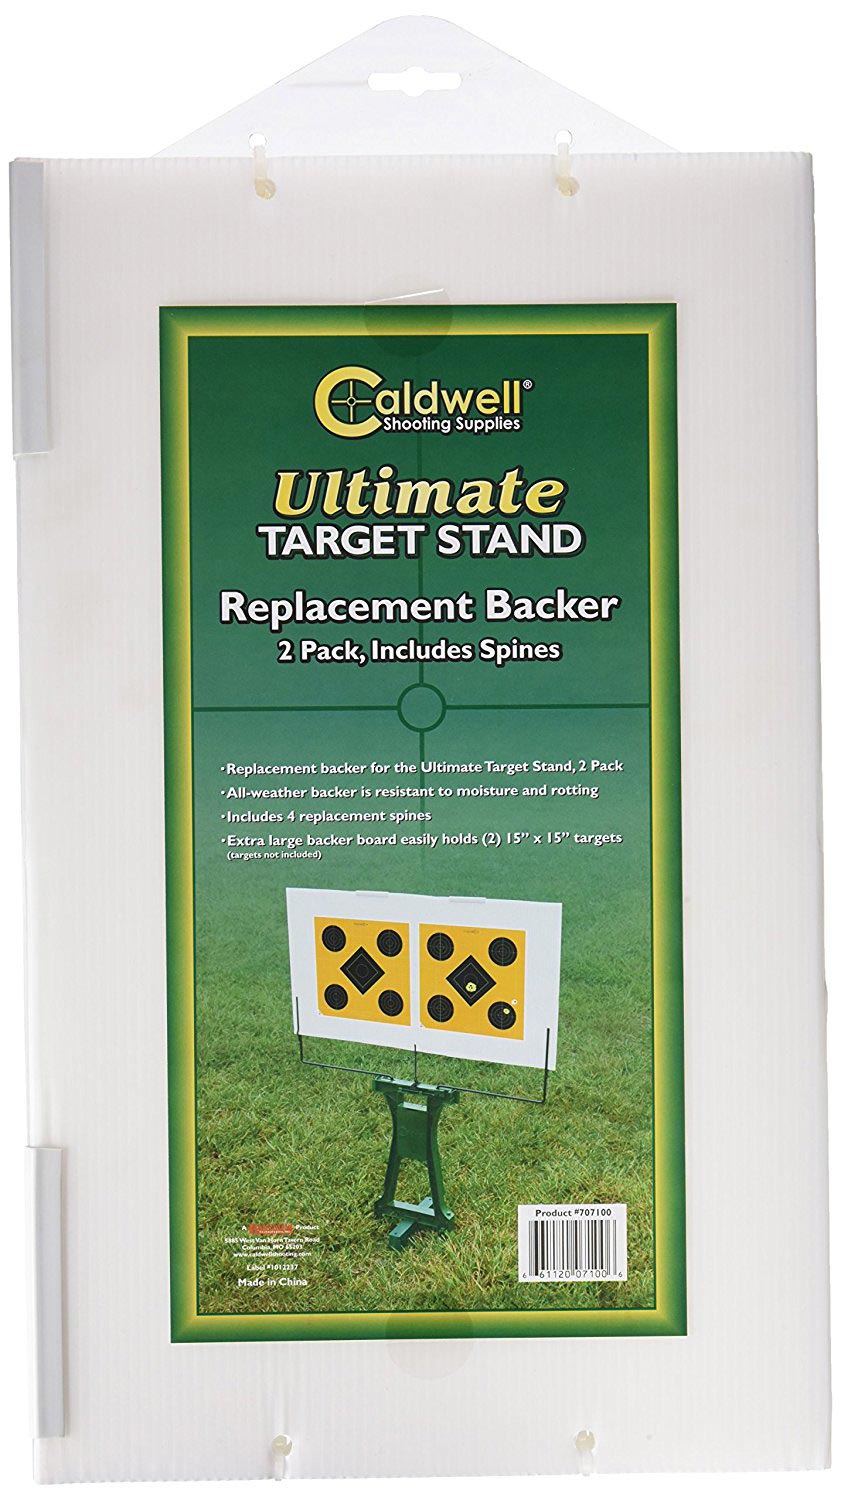 BTI 707100 Caldwell Replacement Backers for the Ultimate Target Stand 2 Pack